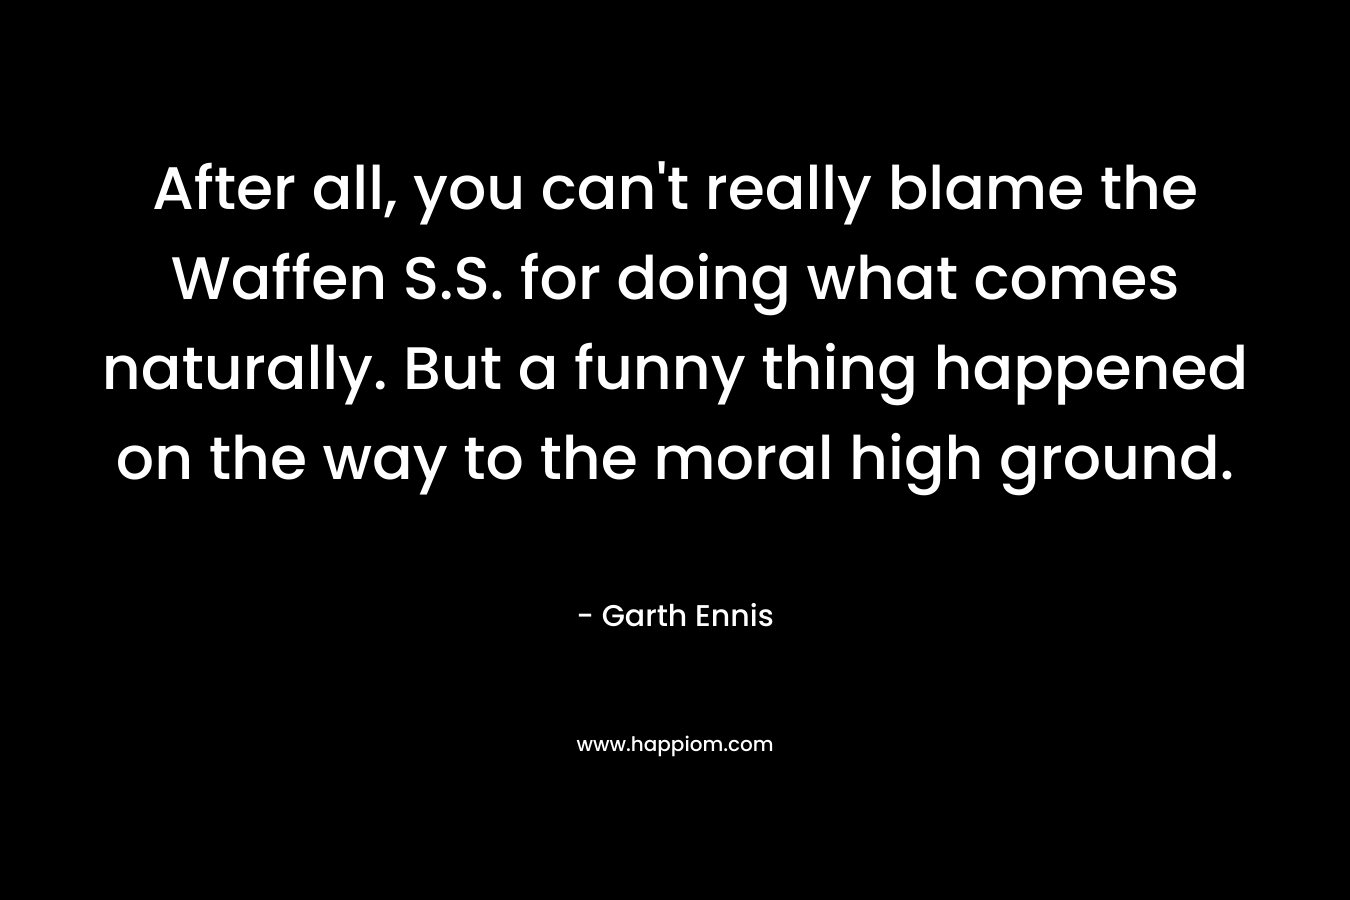 After all, you can’t really blame the Waffen S.S. for doing what comes naturally. But a funny thing happened on the way to the moral high ground. – Garth Ennis